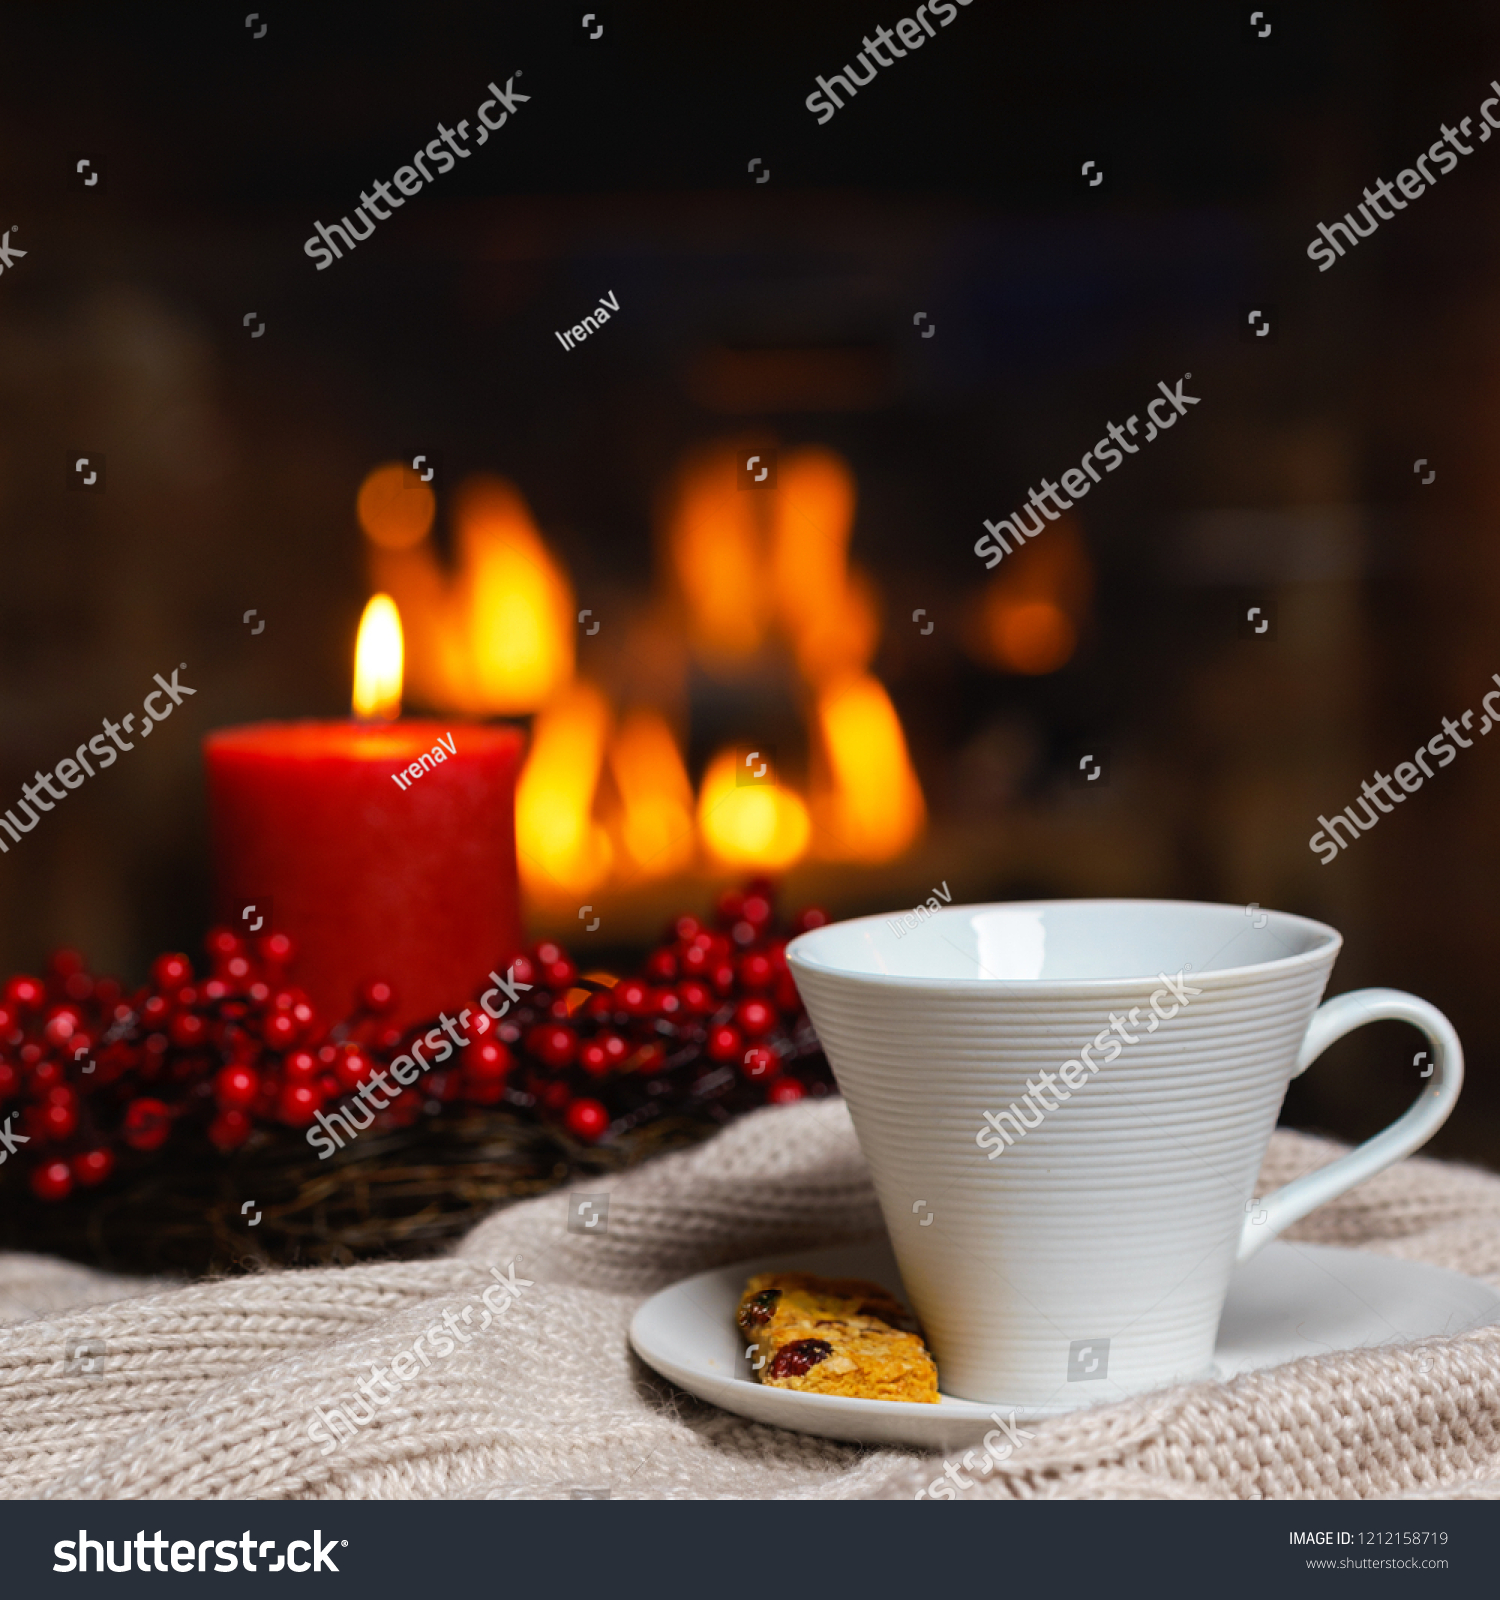 Cup of hot drink with cookie berries and red candle in red Christmas decoration on cozy knitted plaid in front of fireplace. Christmas New Year concept. Cozy relaxed magical atmosphere home interior. #1212158719